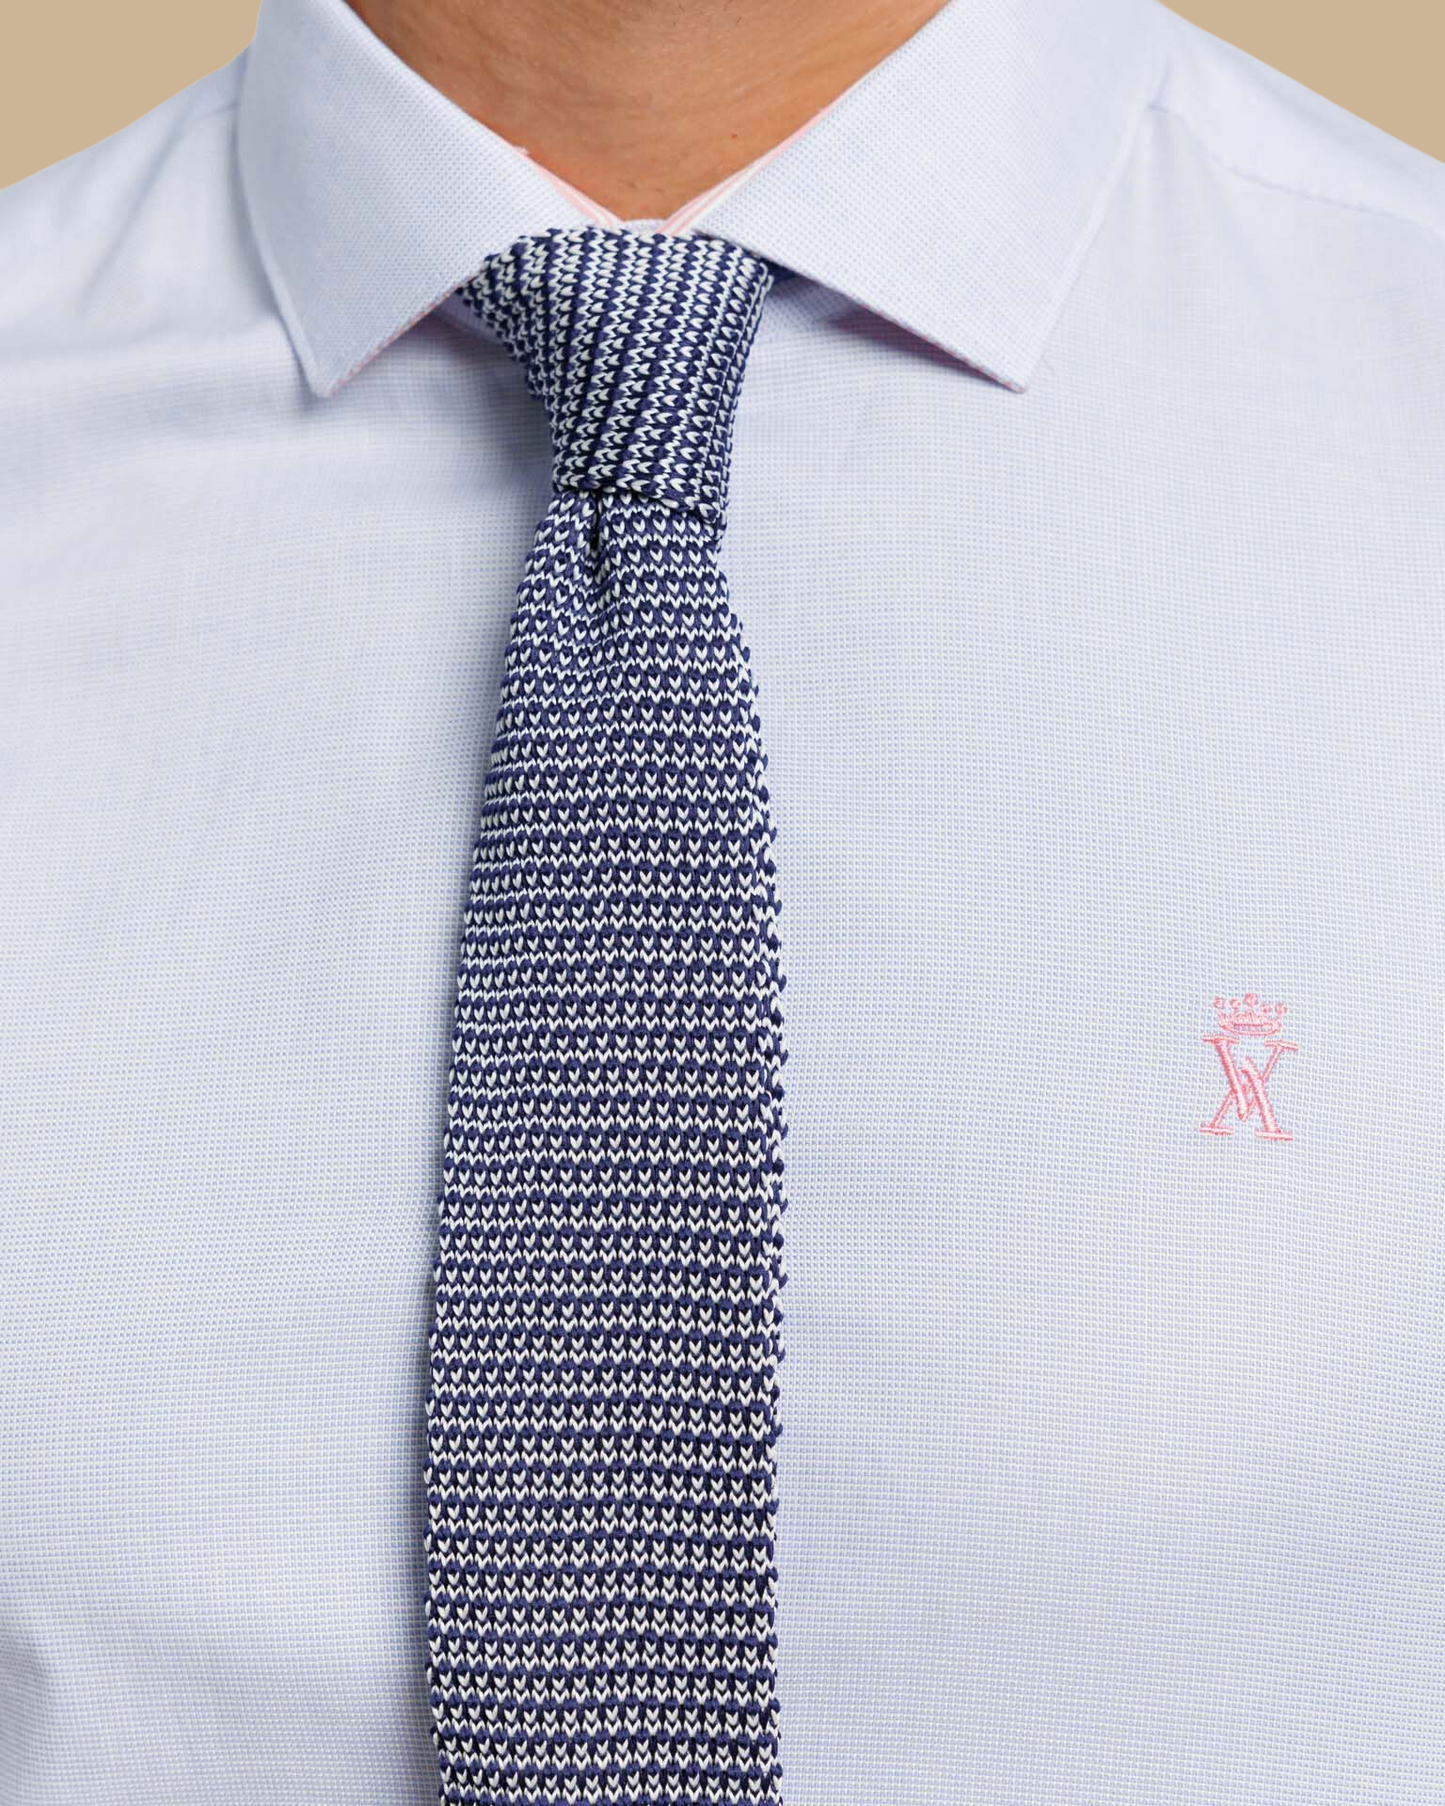 ADEL Knitted Striped Tie - Blue and White